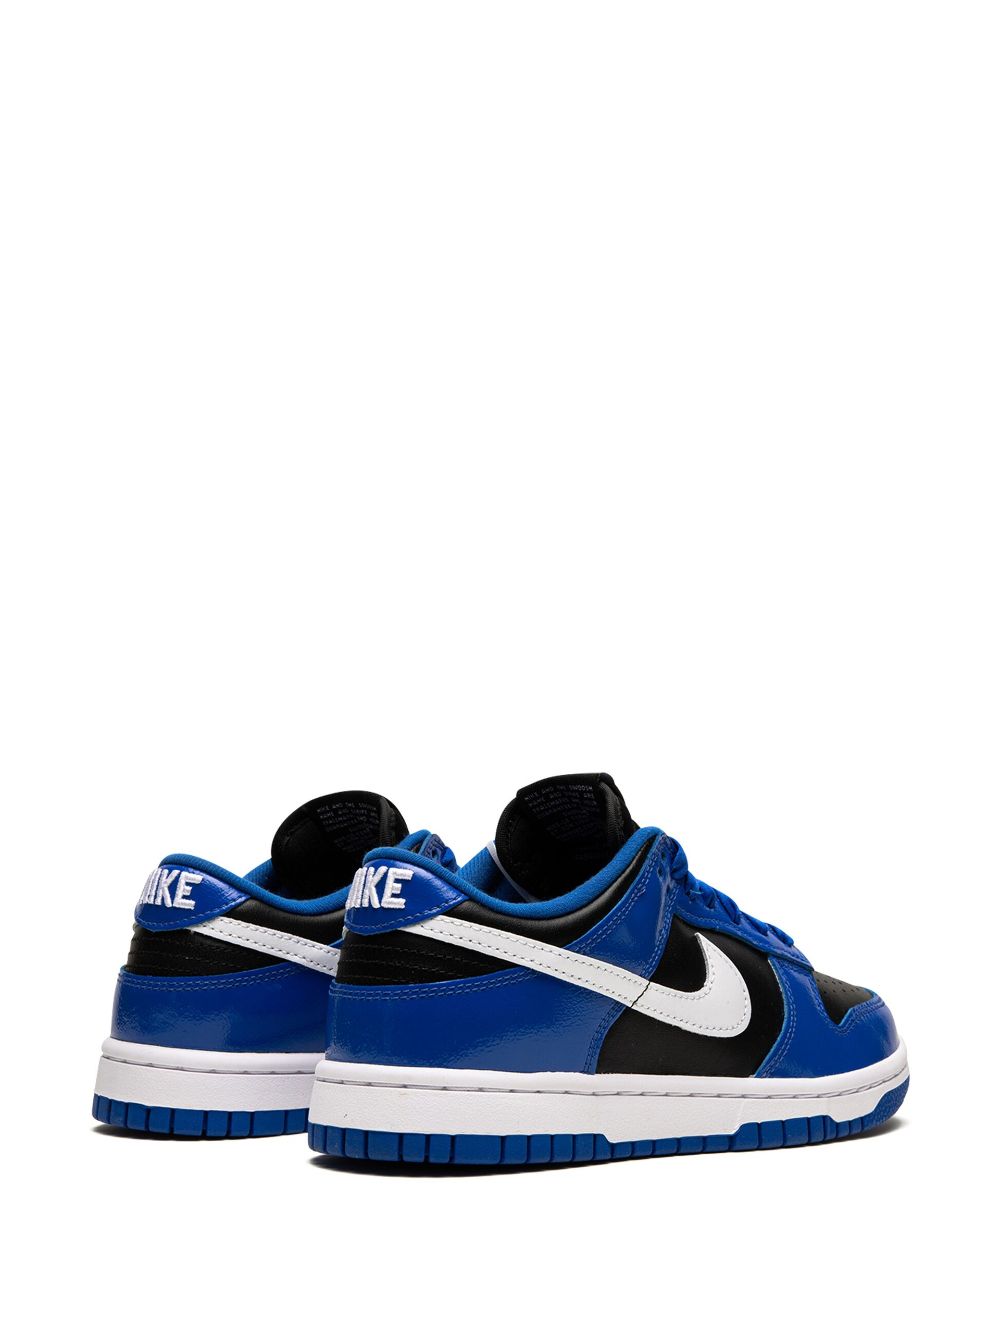 Dunk Low Women's 'game Royal' Sneakers - Dq7576-400 In Blue